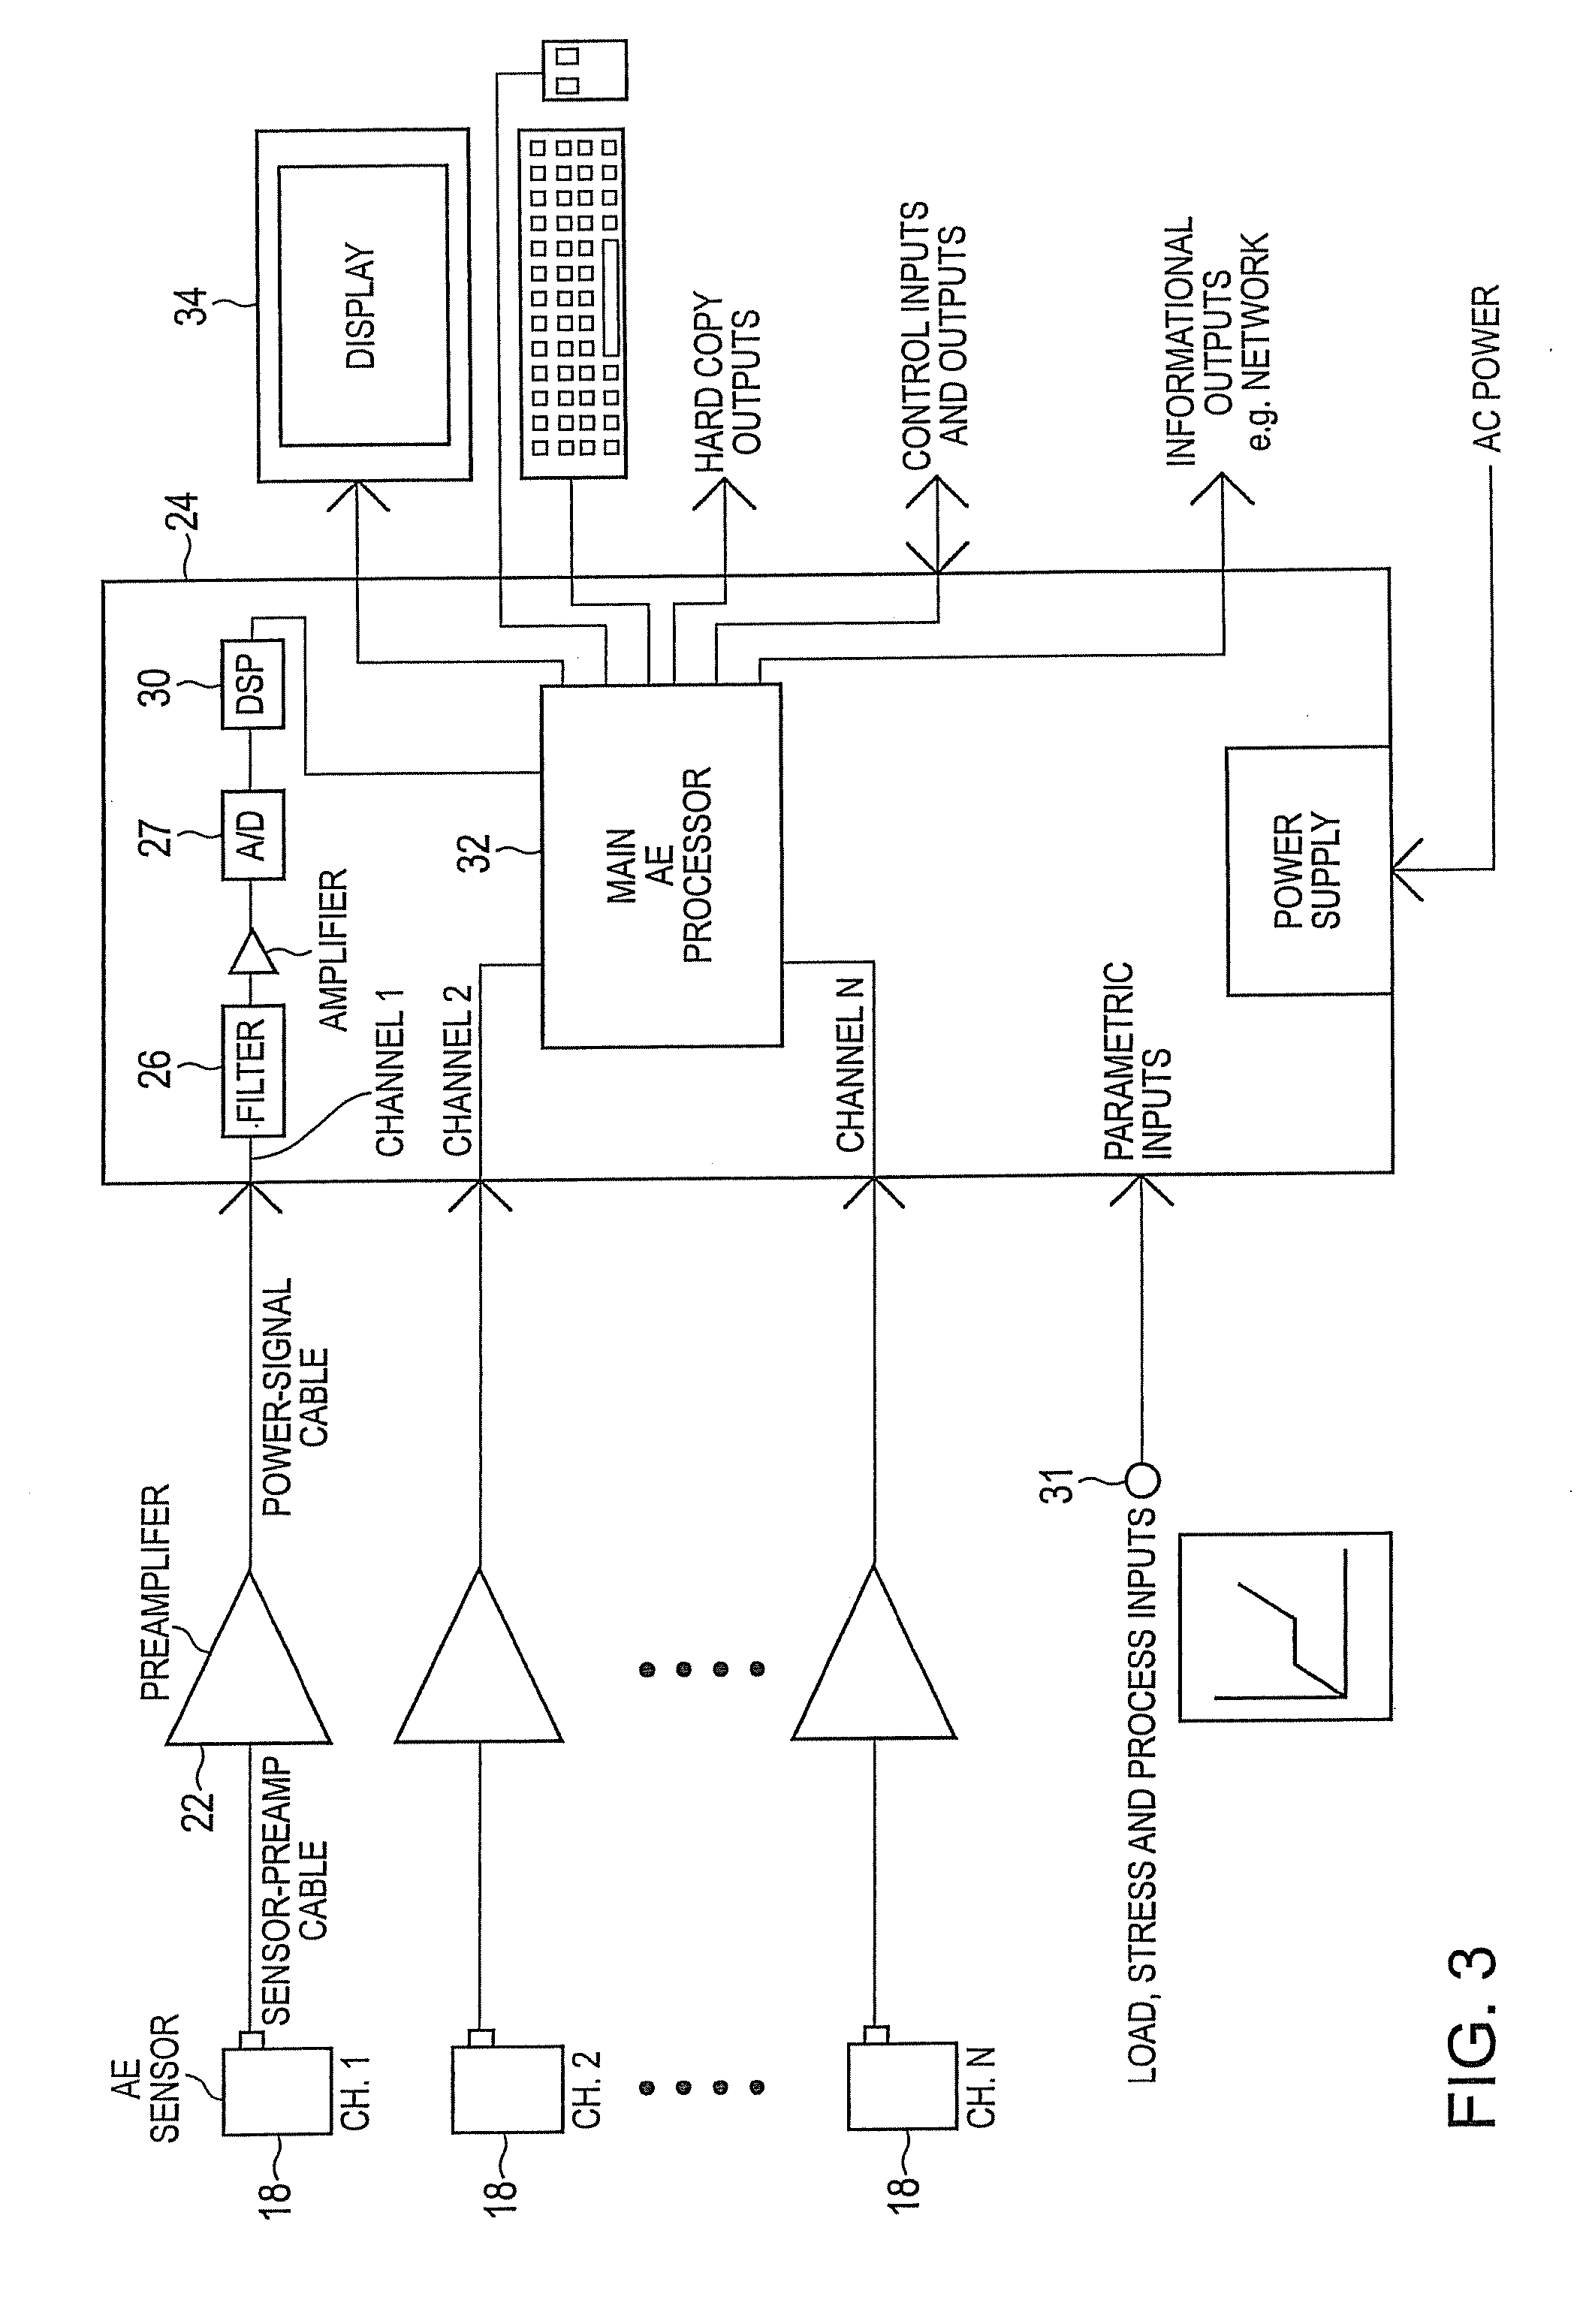 Method and apparatus for controlling relative  coal flow in pipes from a pulverizer